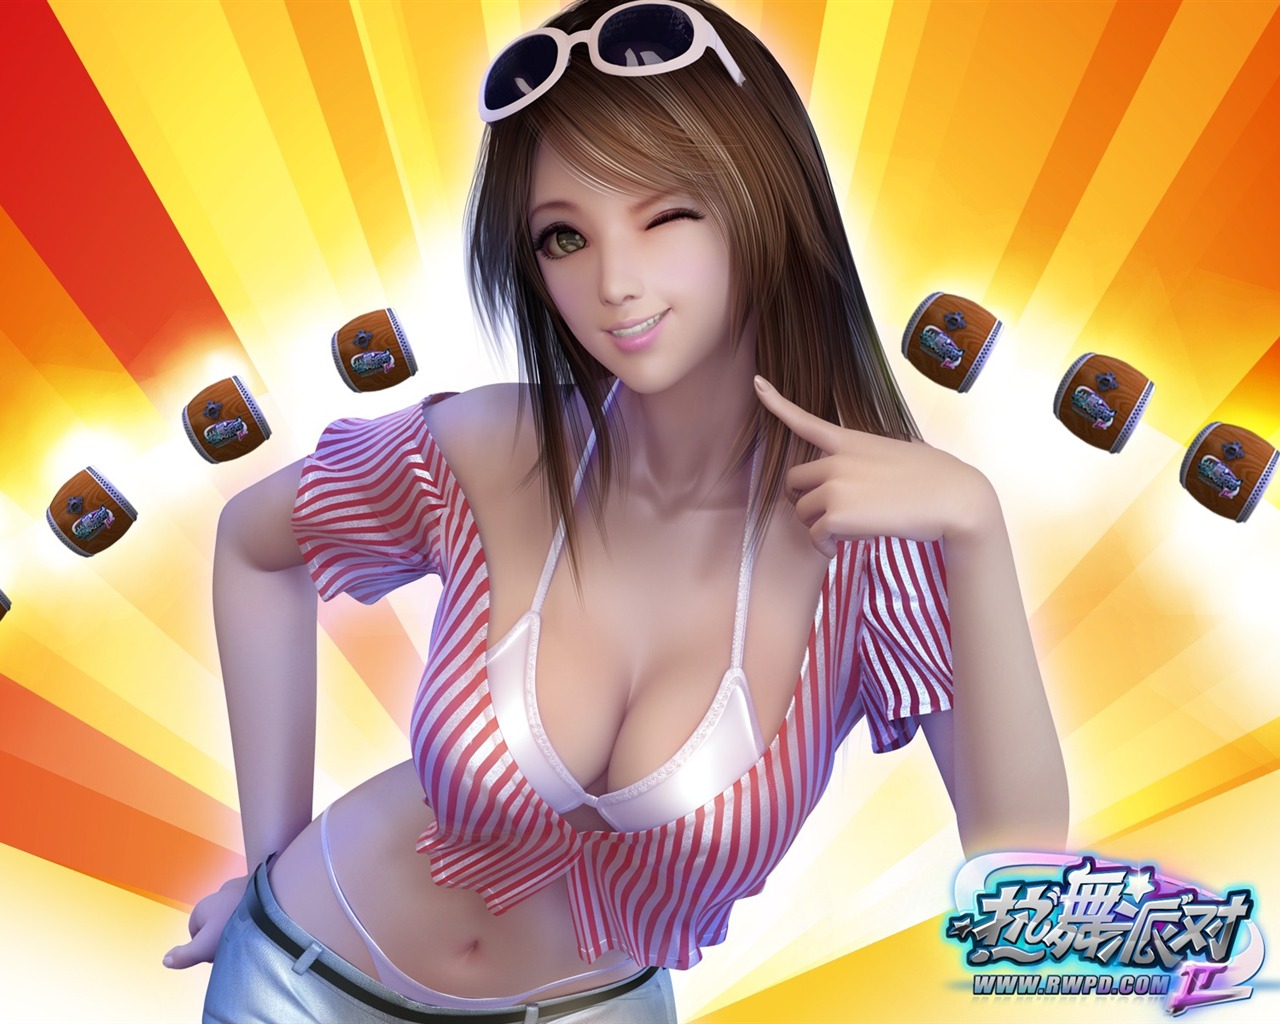 Online game Hot Dance Party II official wallpapers #19 - 1280x1024